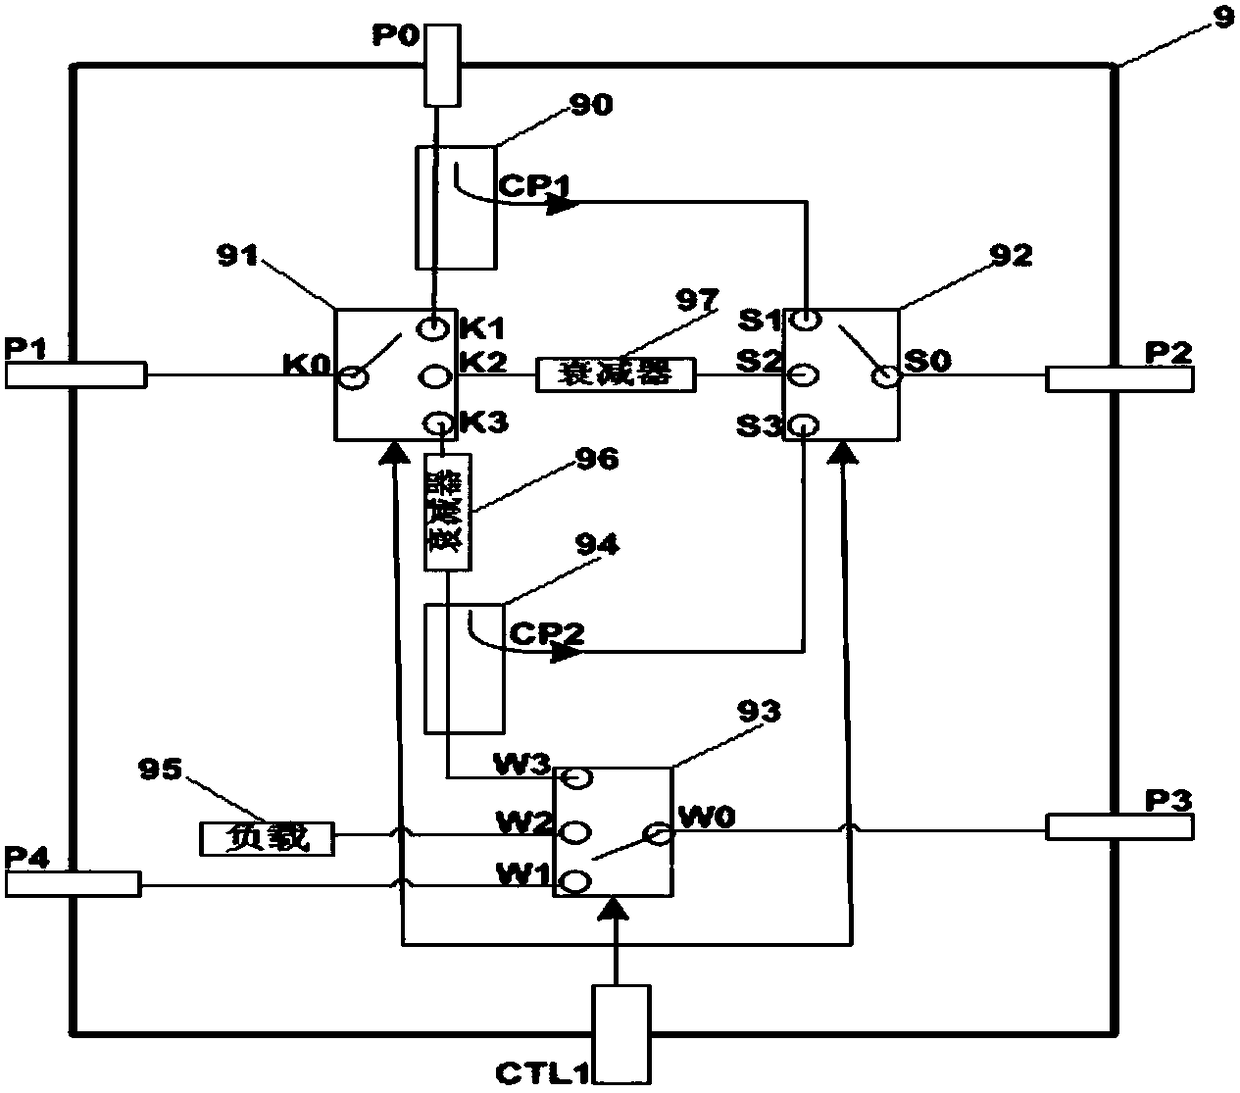 A system and test method for radio frequency testing of digital transceivers